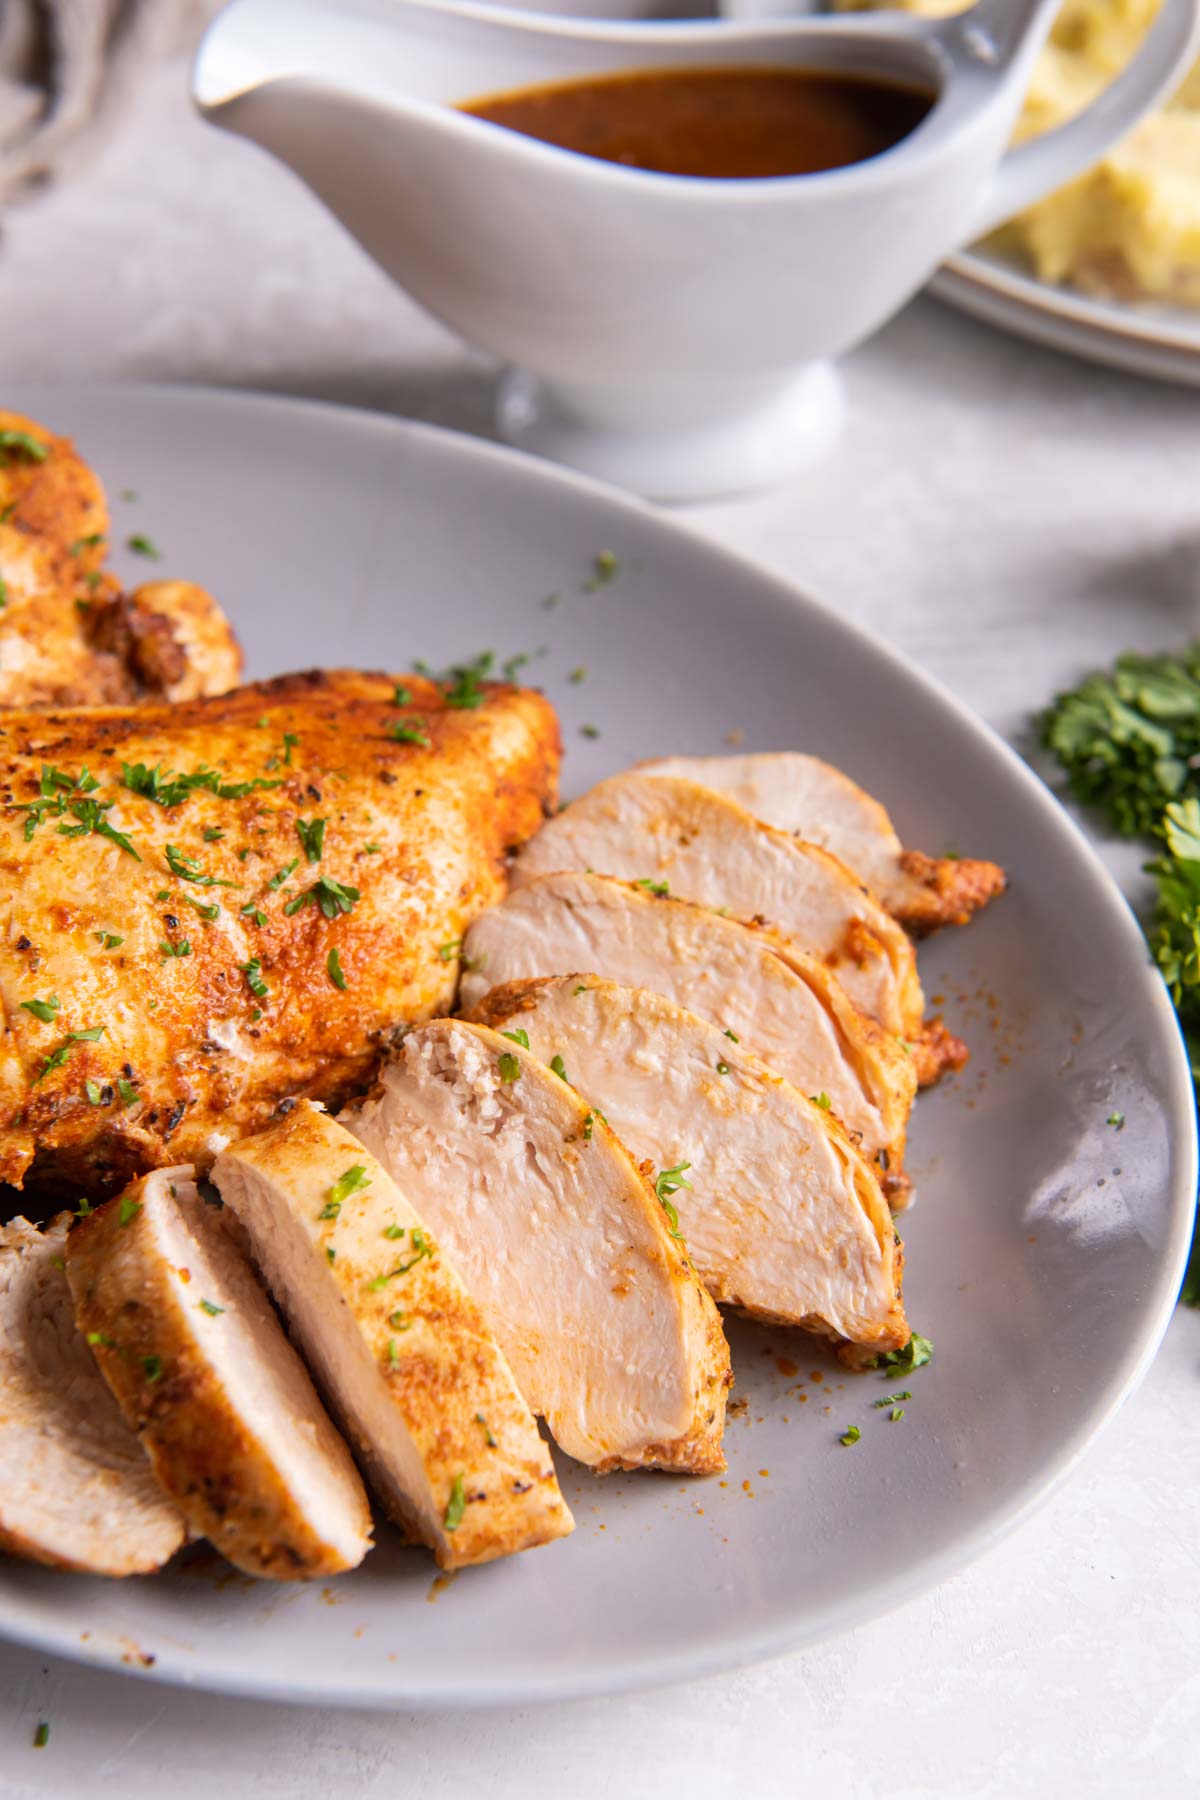 Easy Instant Pot Chicken Breast (+ More Instant Pot Chicken Breast Recipes)  - Fit Foodie Finds